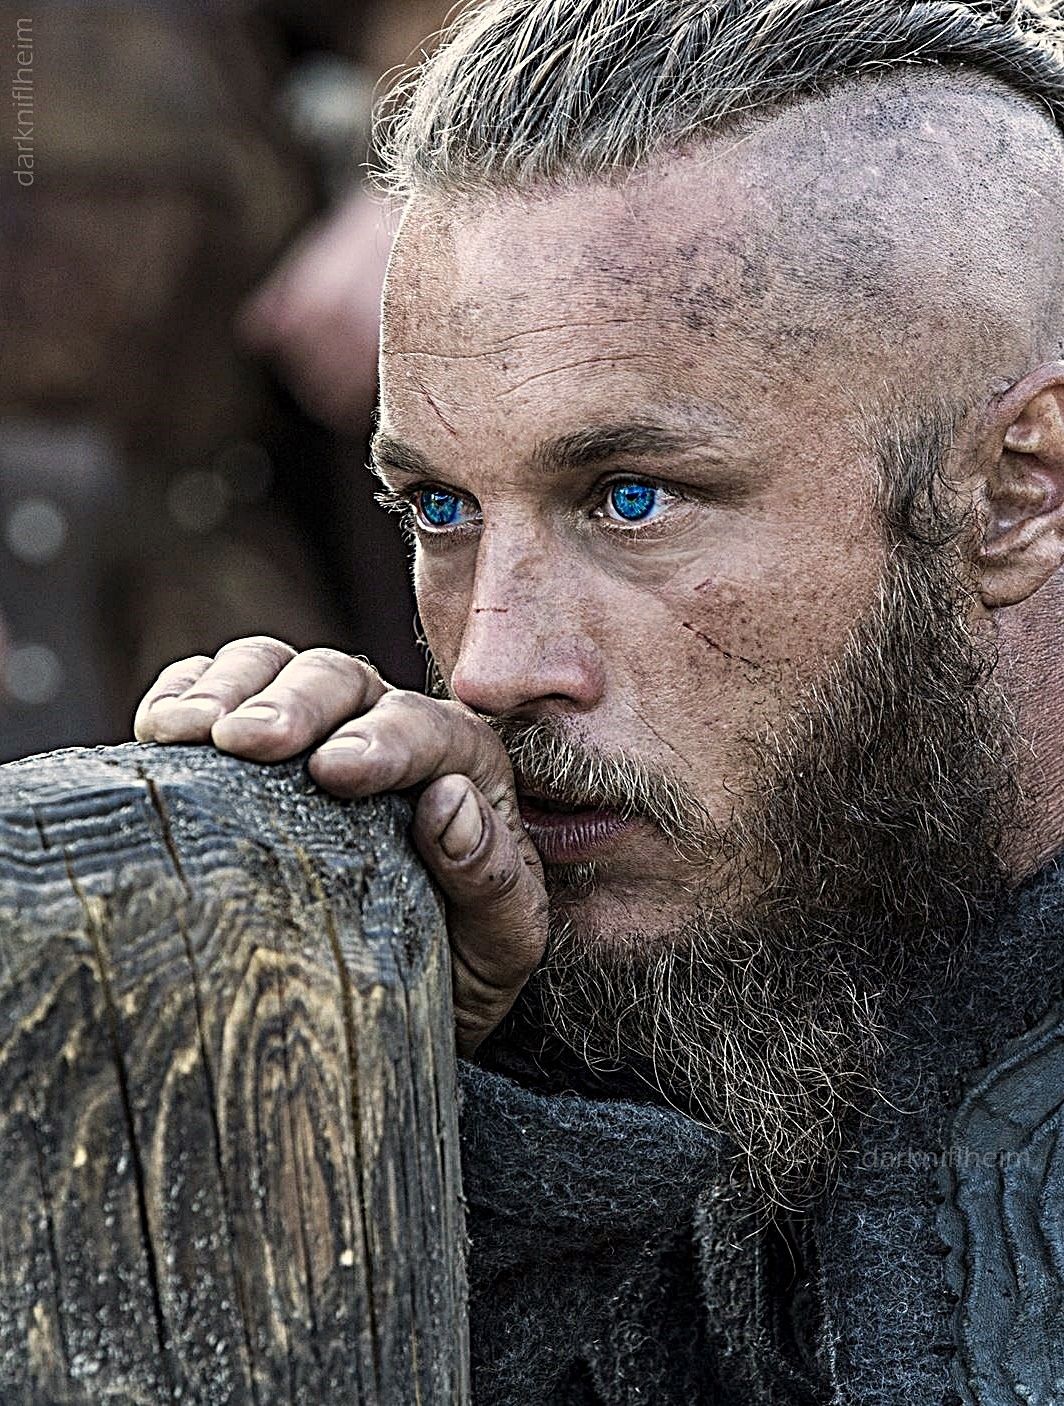 29. Nobody from Game of Thrones can beat this guy, Ragnar Lothbrok, I repea...